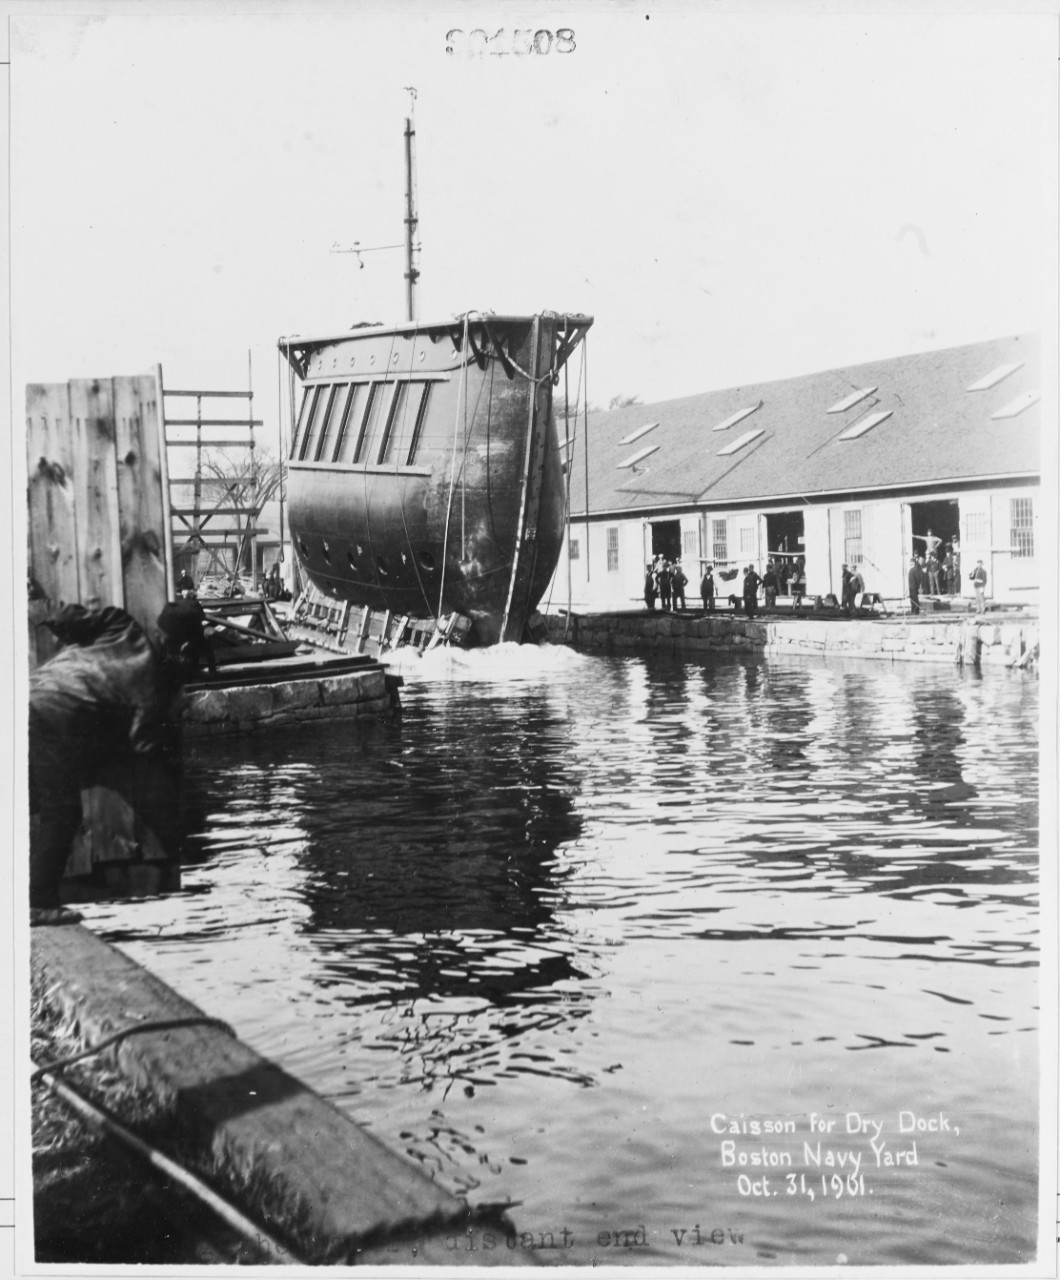 Launching of caisson for Dry Dock #1 (1901), Boston Navy Yard